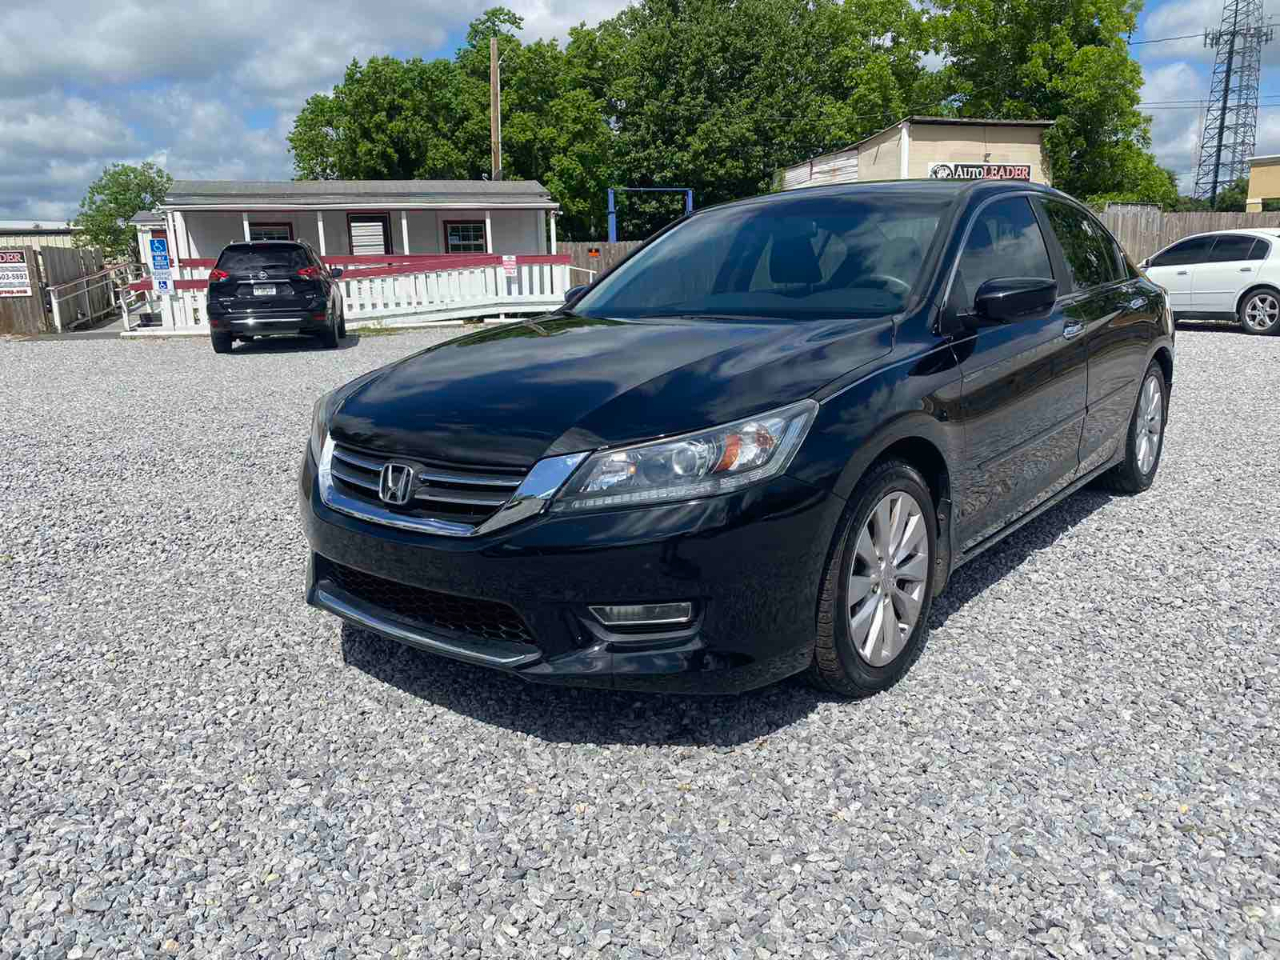 Used 2013 Honda Accord Sold in Pensecola FL 32503 Auto Leader Group